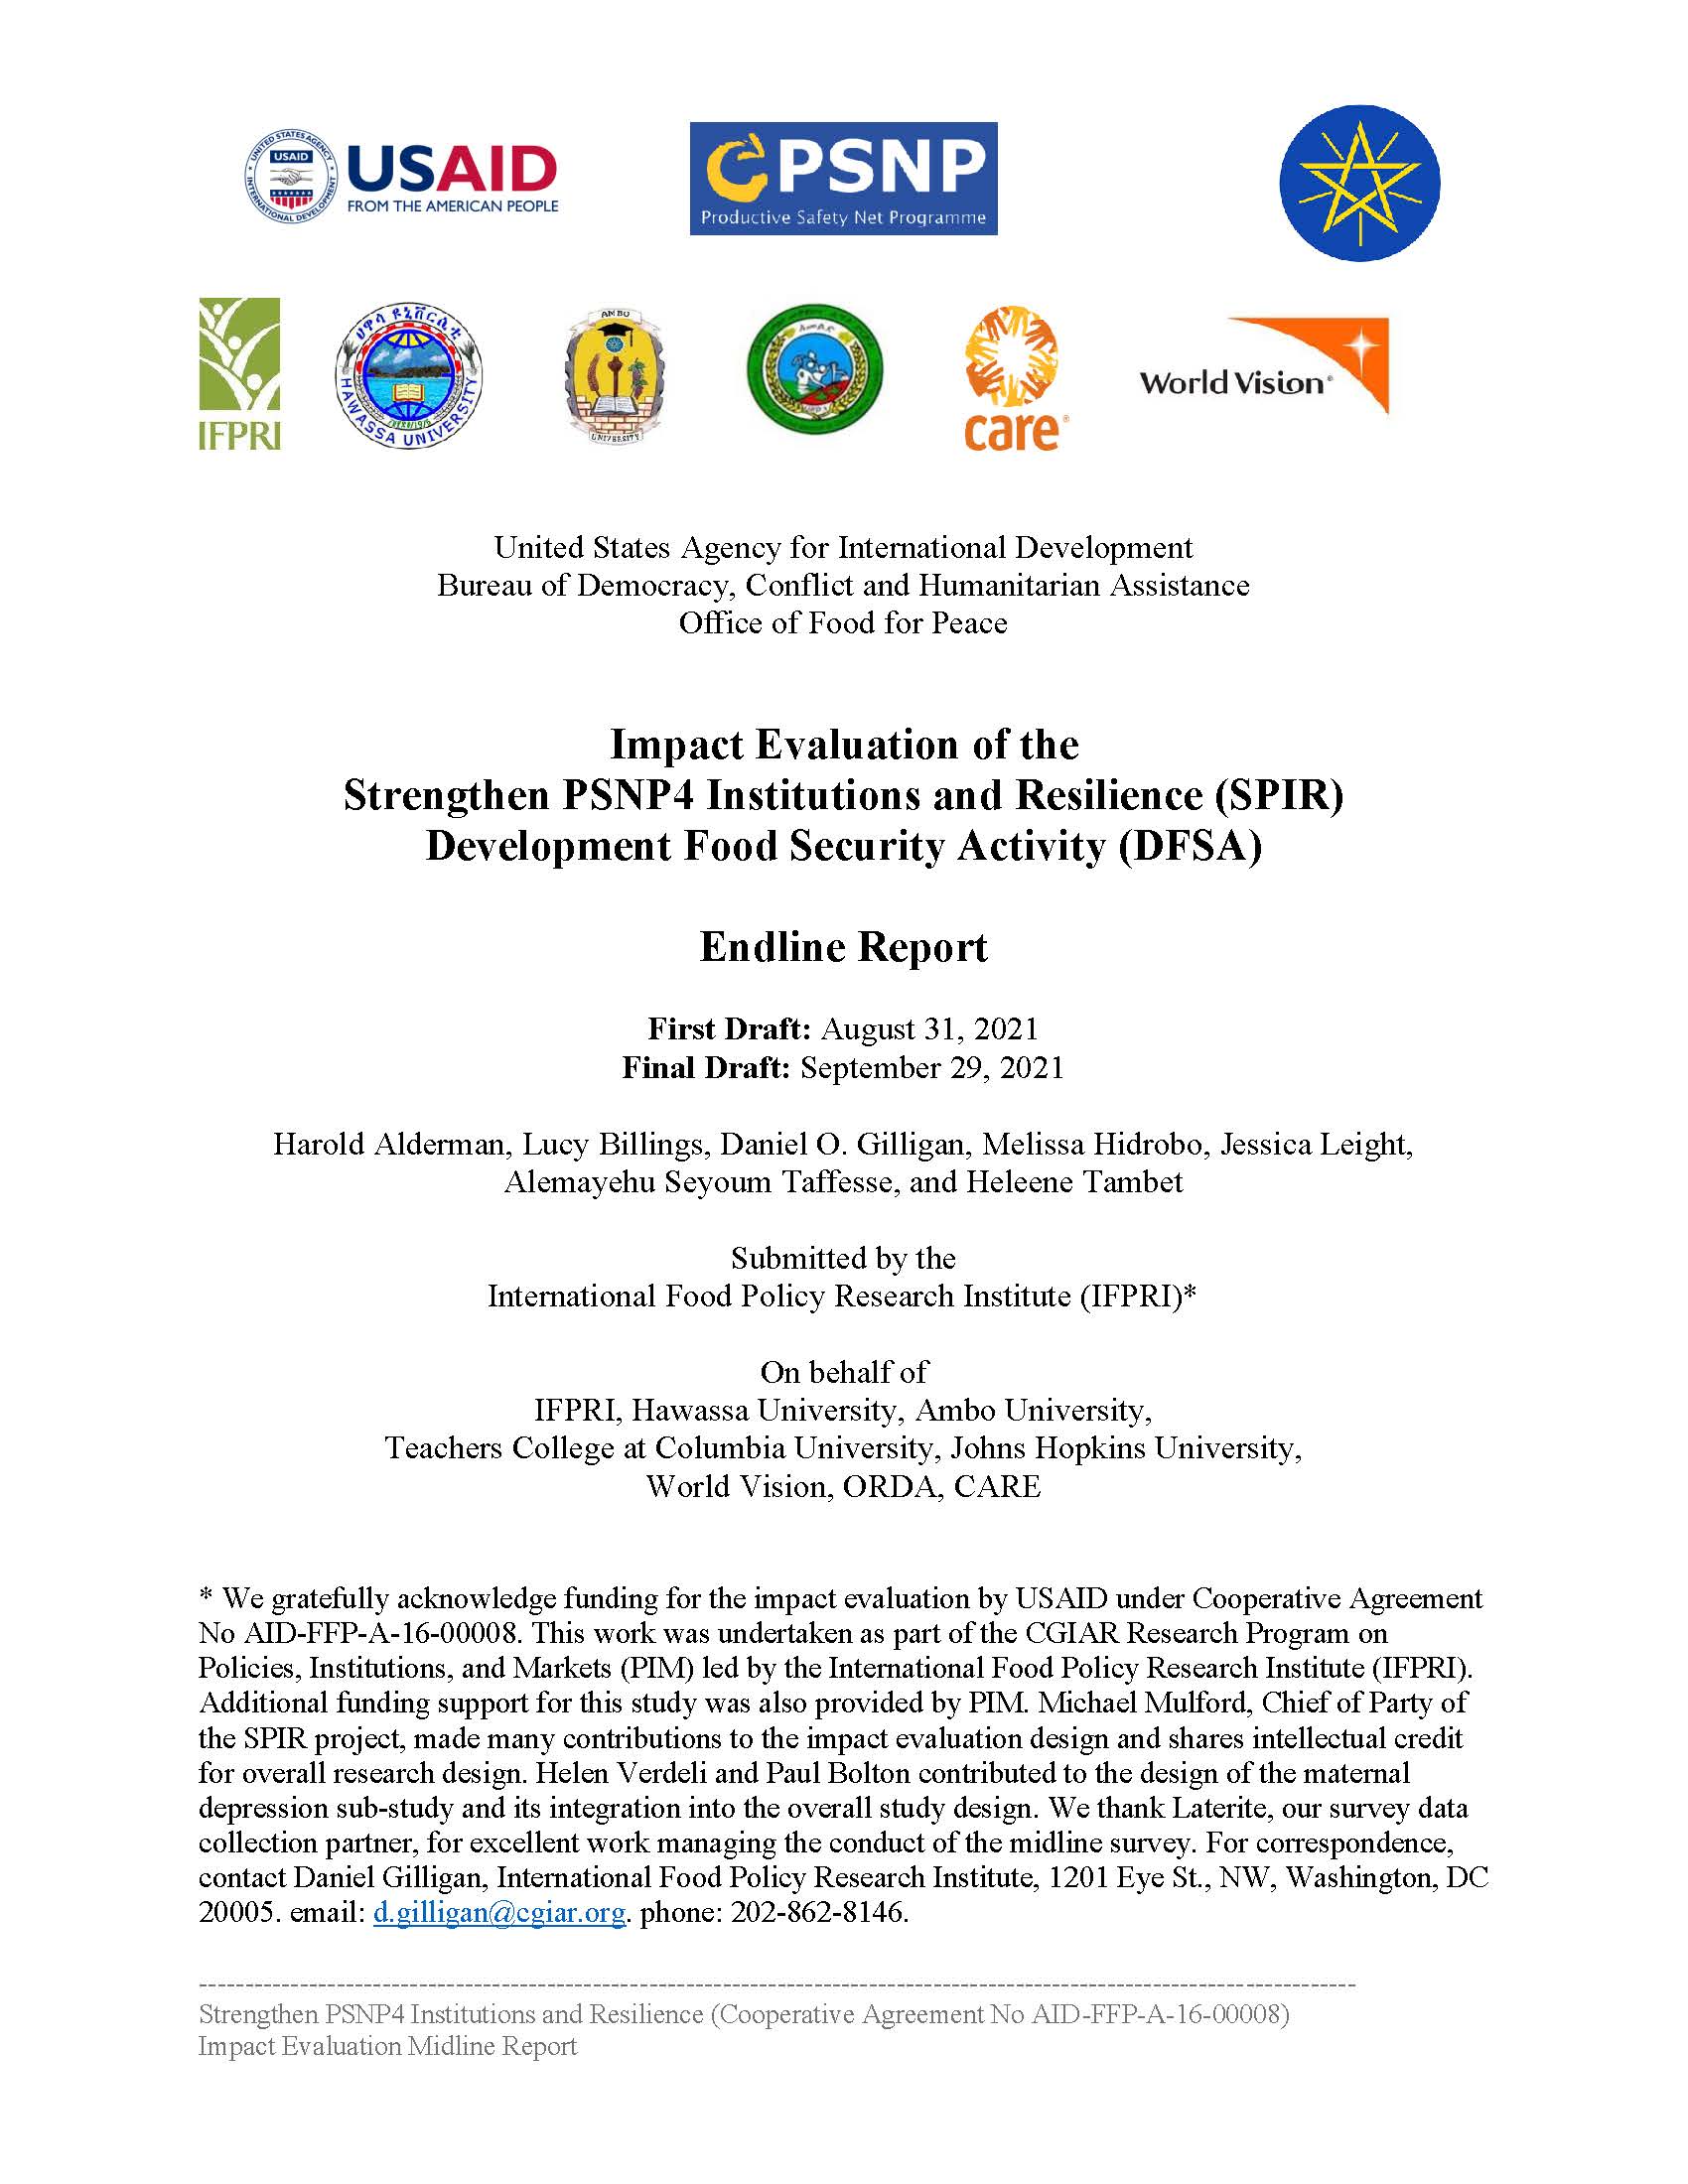 Cover Page for Impact Evaluation of the Strengthen PSNP4 Institutions and Resilience (SPIR) Development Food Security Activity (DFSA)